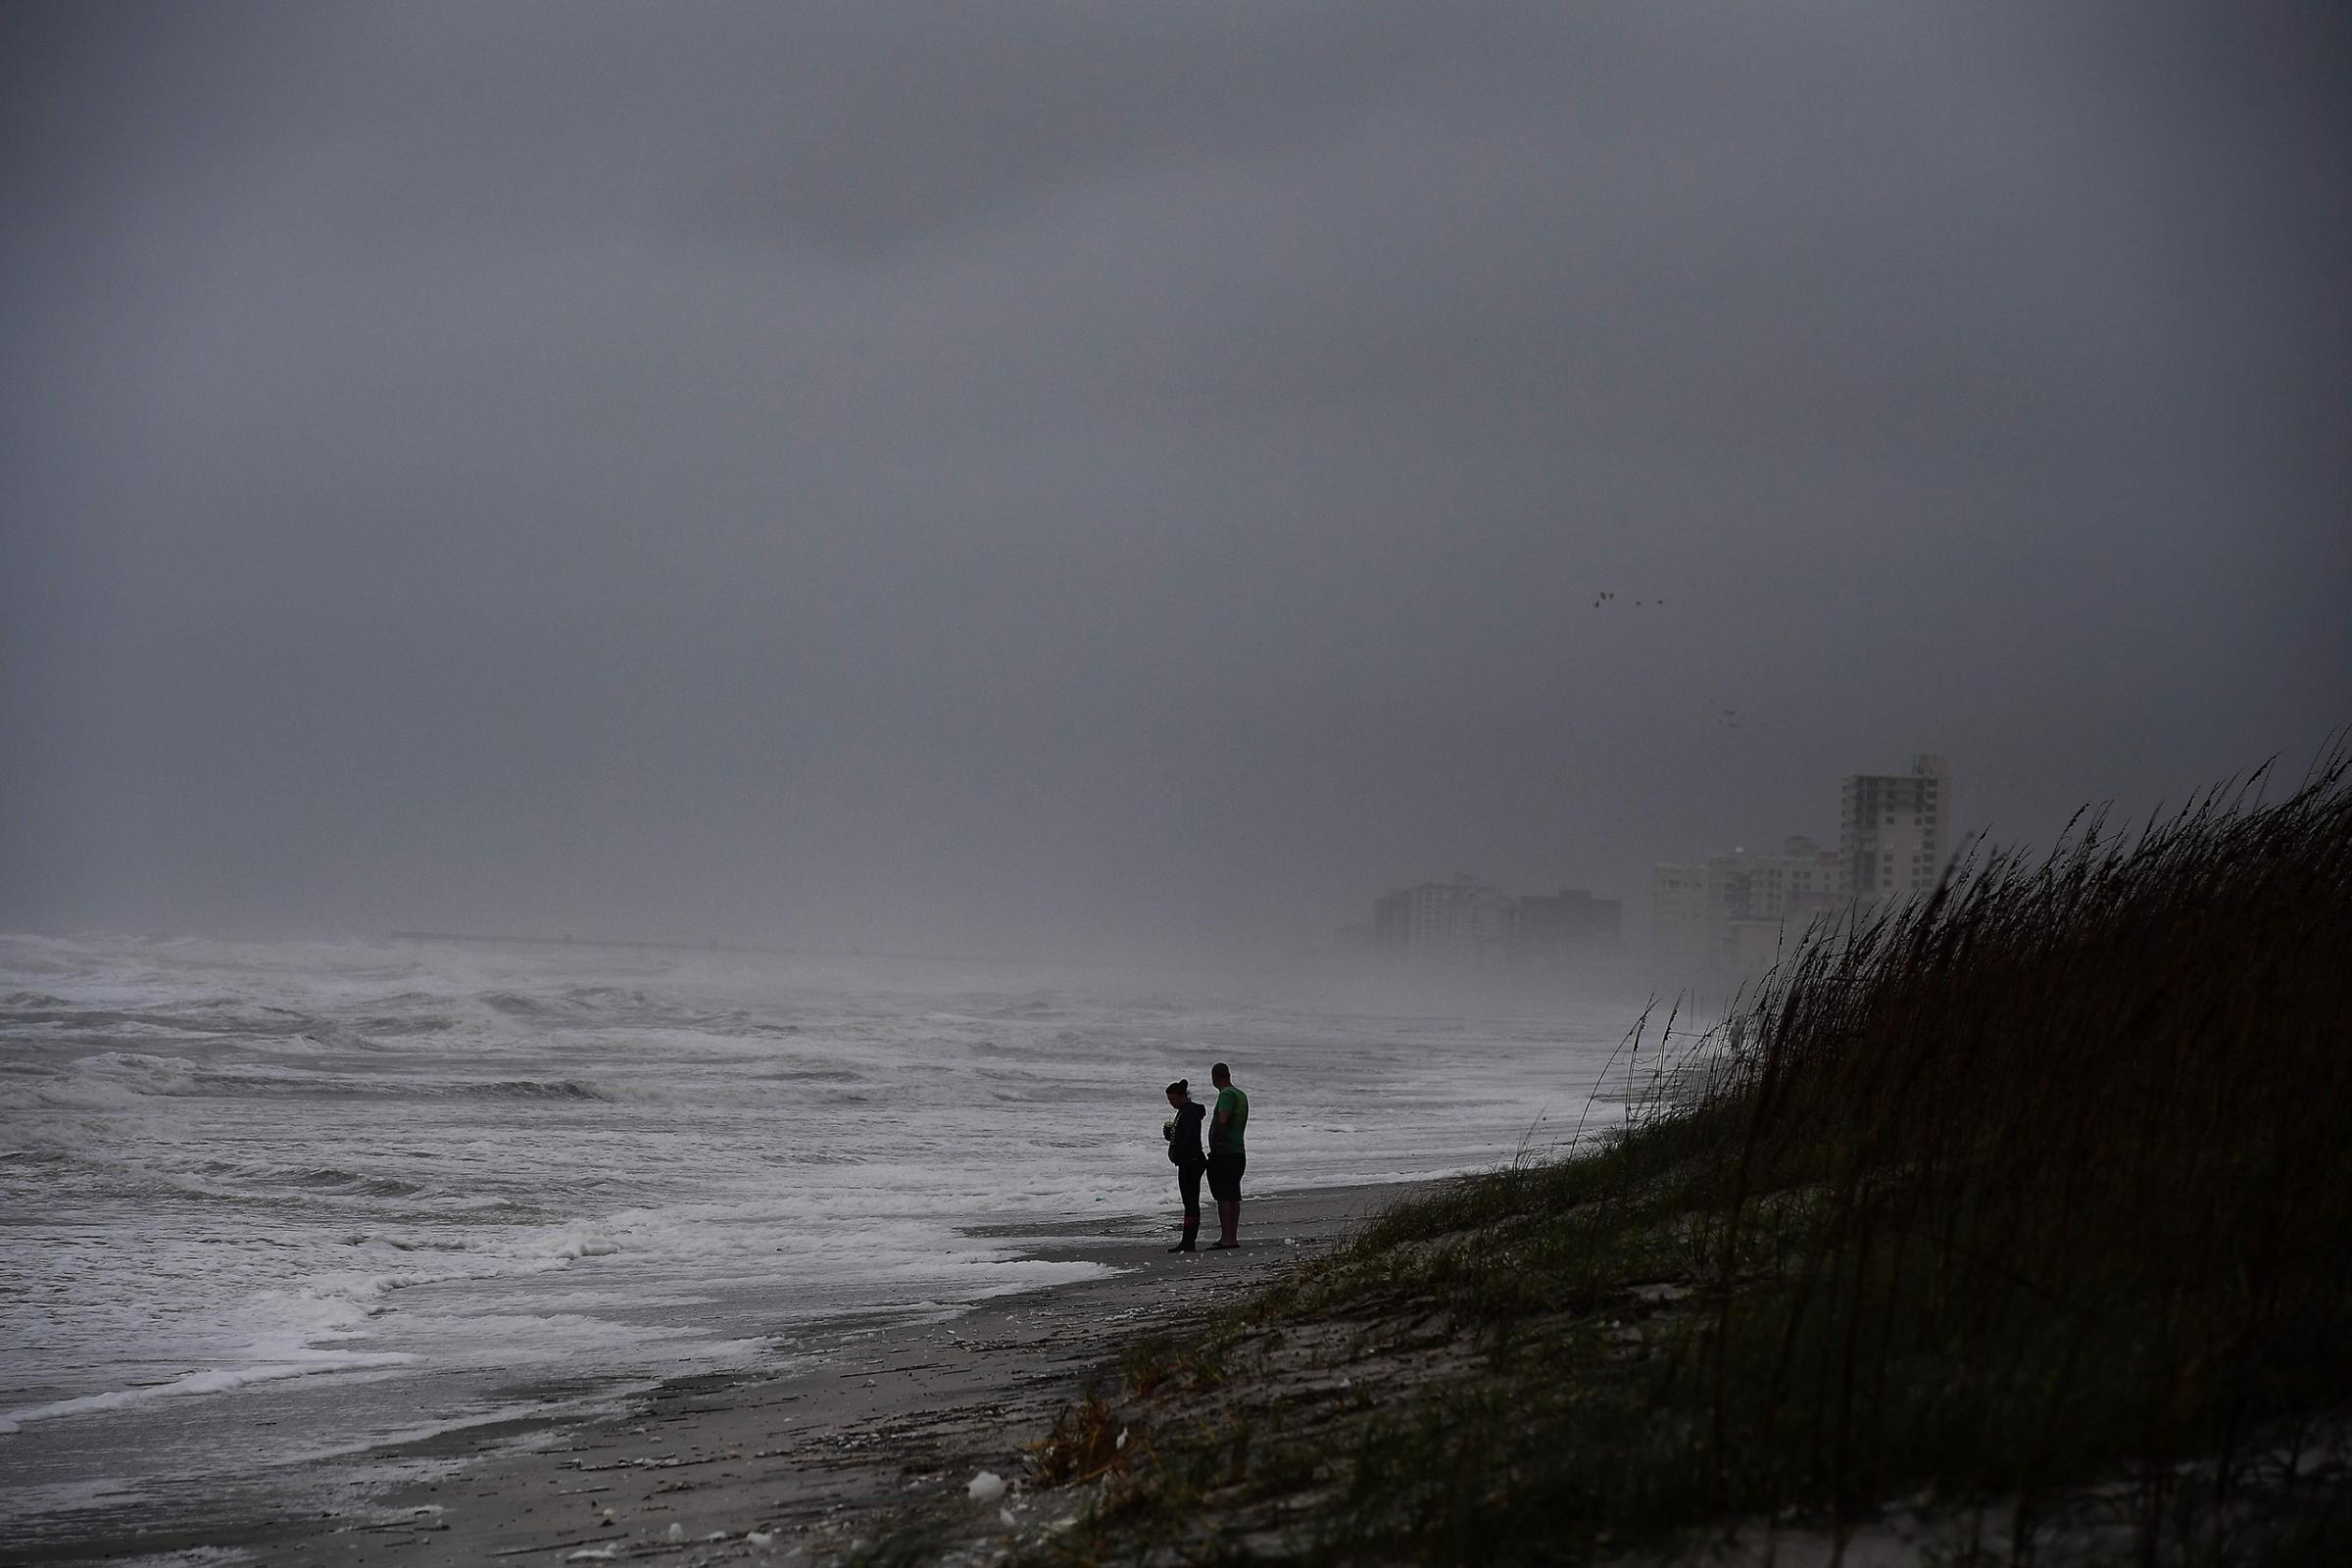 Local residents watch waves at the Atlantic Beach in Jacksonville, Fla., on Oct. 6, 2016.